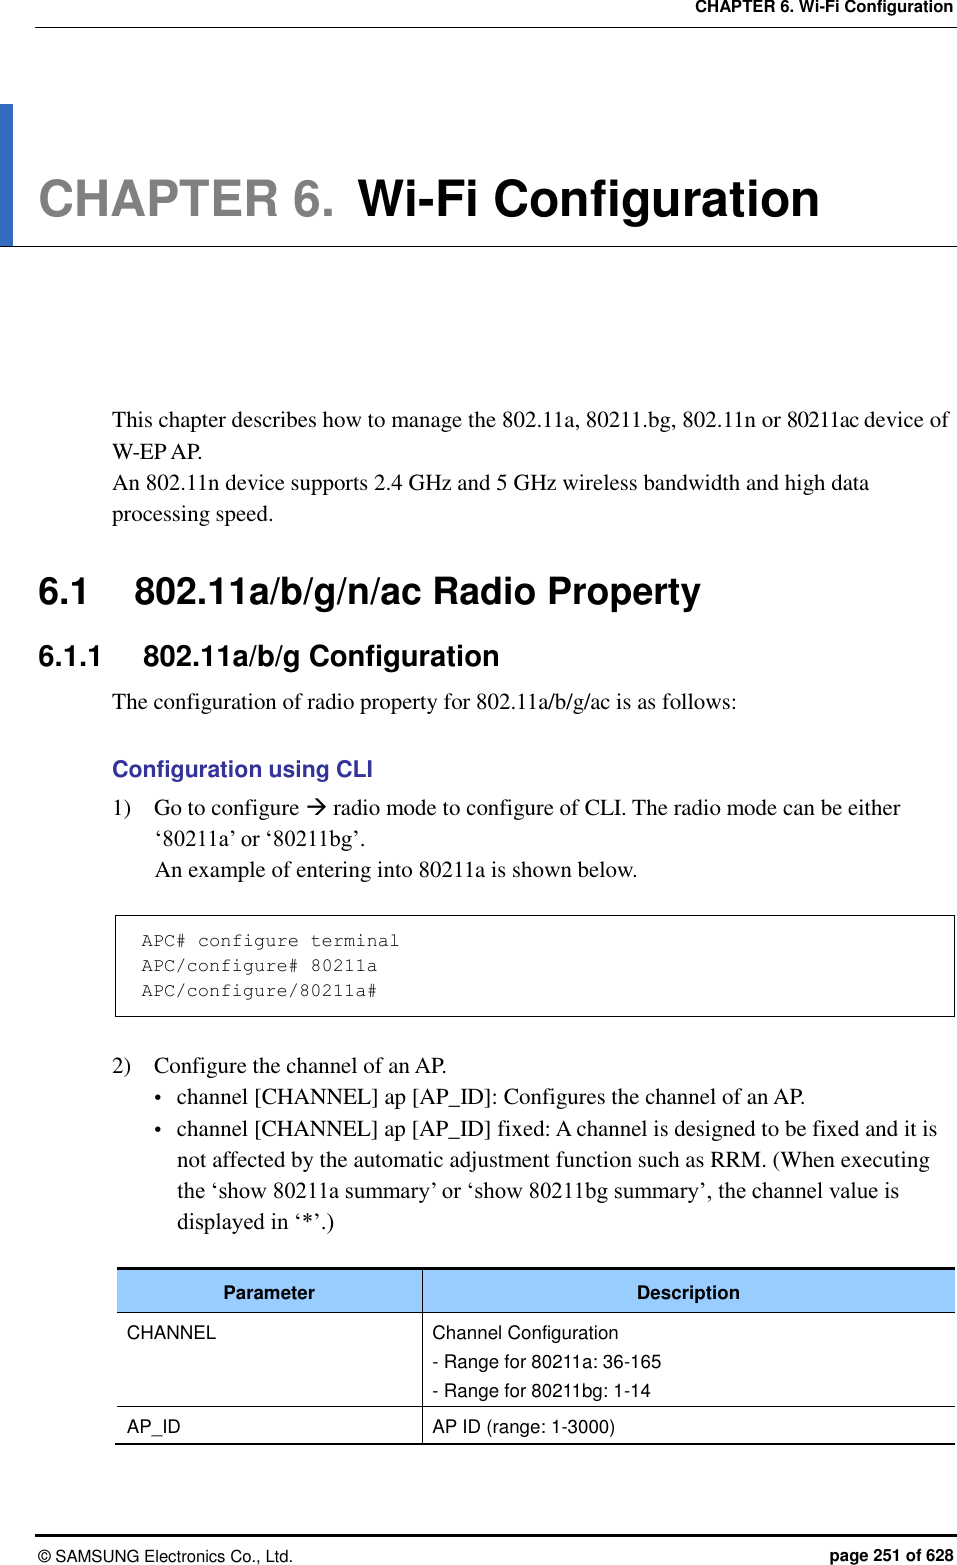 CHAPTER 6. Wi-Fi Configuration ©  SAMSUNG Electronics Co., Ltd.  page 251 of 628 CHAPTER 6. Wi-Fi Configuration      This chapter describes how to manage the 802.11a, 80211.bg, 802.11n or 80211ac device of W-EP AP.   An 802.11n device supports 2.4 GHz and 5 GHz wireless bandwidth and high data processing speed.  6.1  802.11a/b/g/n/ac Radio Property 6.1.1  802.11a/b/g Configuration The configuration of radio property for 802.11a/b/g/ac is as follows:  Configuration using CLI 1)    Go to configure  radio mode to configure of CLI. The radio mode can be either ‘80211a’ or ‘80211bg’.   An example of entering into 80211a is shown below.  APC# configure terminal APC/configure# 80211a APC/configure/80211a#  2)    Configure the channel of an AP.  channel [CHANNEL] ap [AP_ID]: Configures the channel of an AP.    channel [CHANNEL] ap [AP_ID] fixed: A channel is designed to be fixed and it is not affected by the automatic adjustment function such as RRM. (When executing the ‘show 80211a summary’ or ‘show 80211bg summary’, the channel value is displayed in ‘*’.)  Parameter Description CHANNEL Channel Configuration - Range for 80211a: 36-165 - Range for 80211bg: 1-14 AP_ID AP ID (range: 1-3000)  